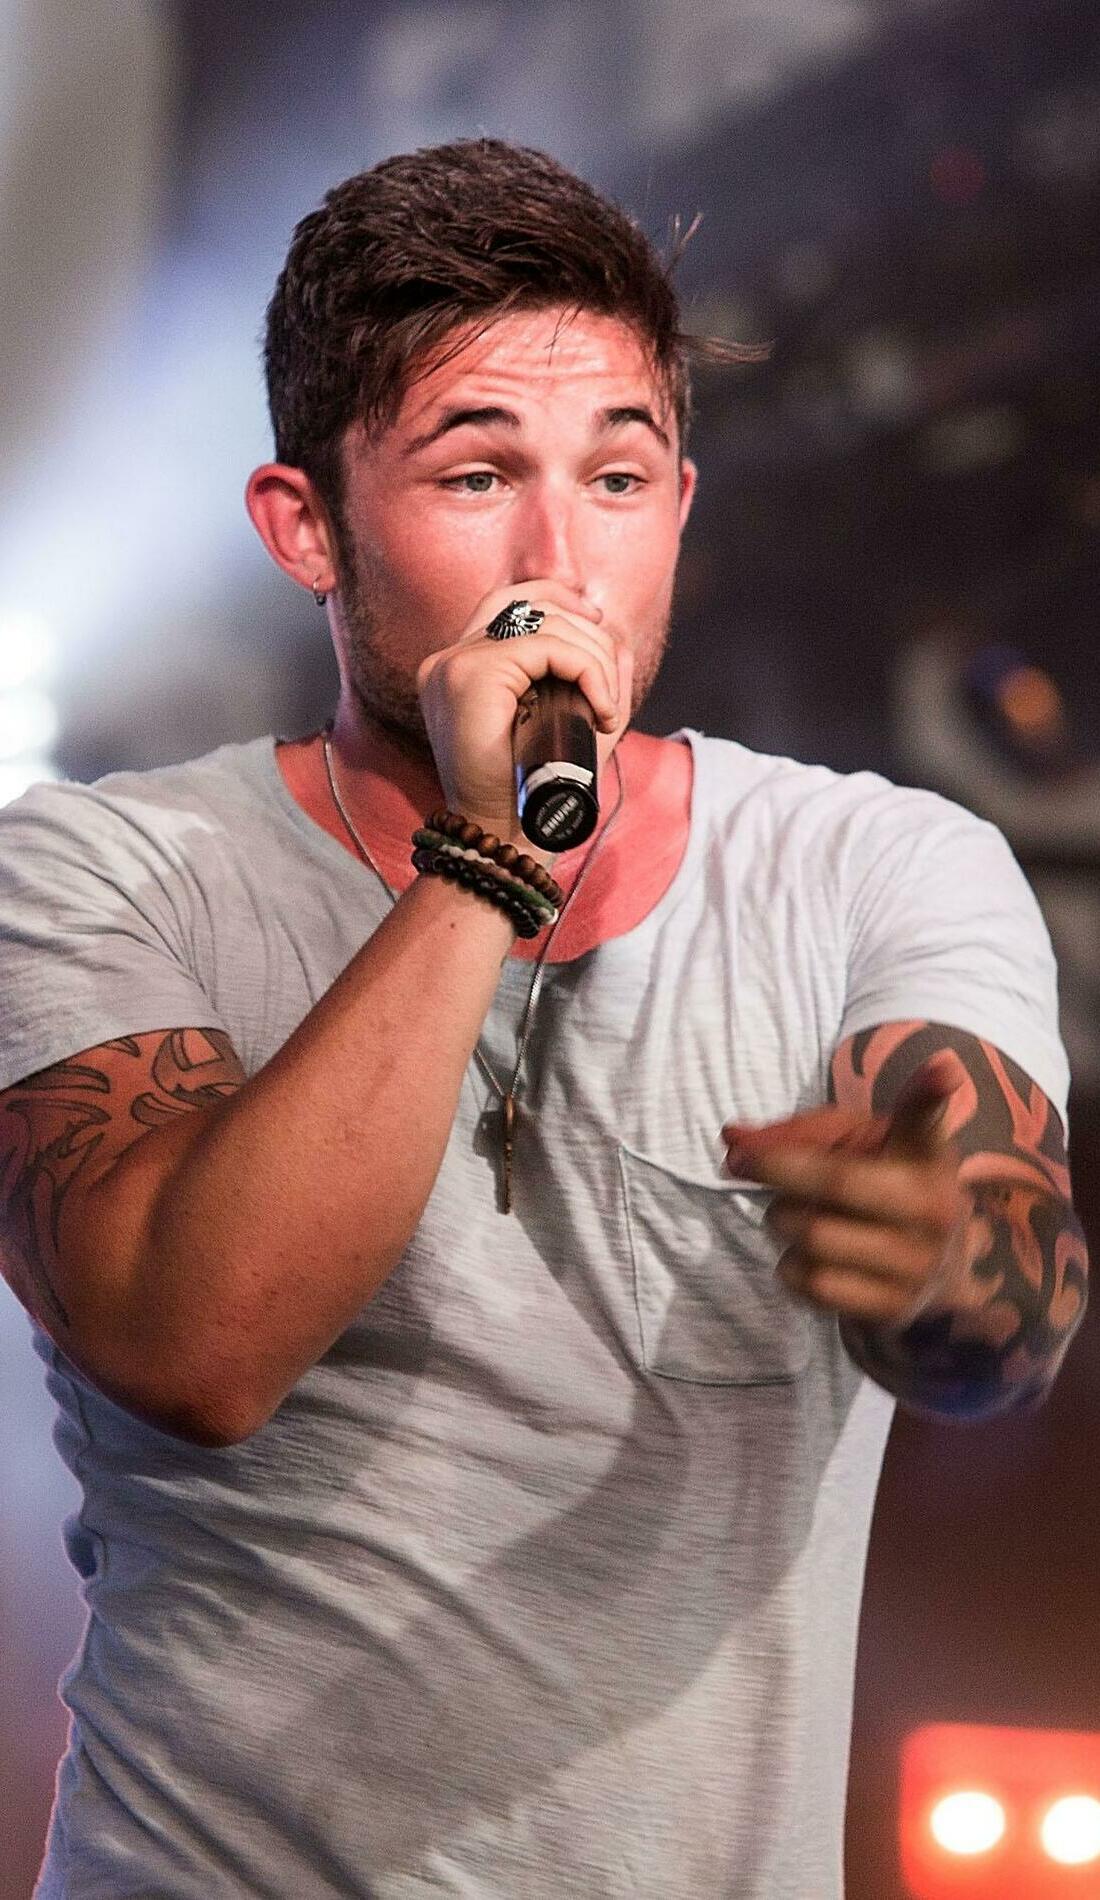 A Michael Ray live event